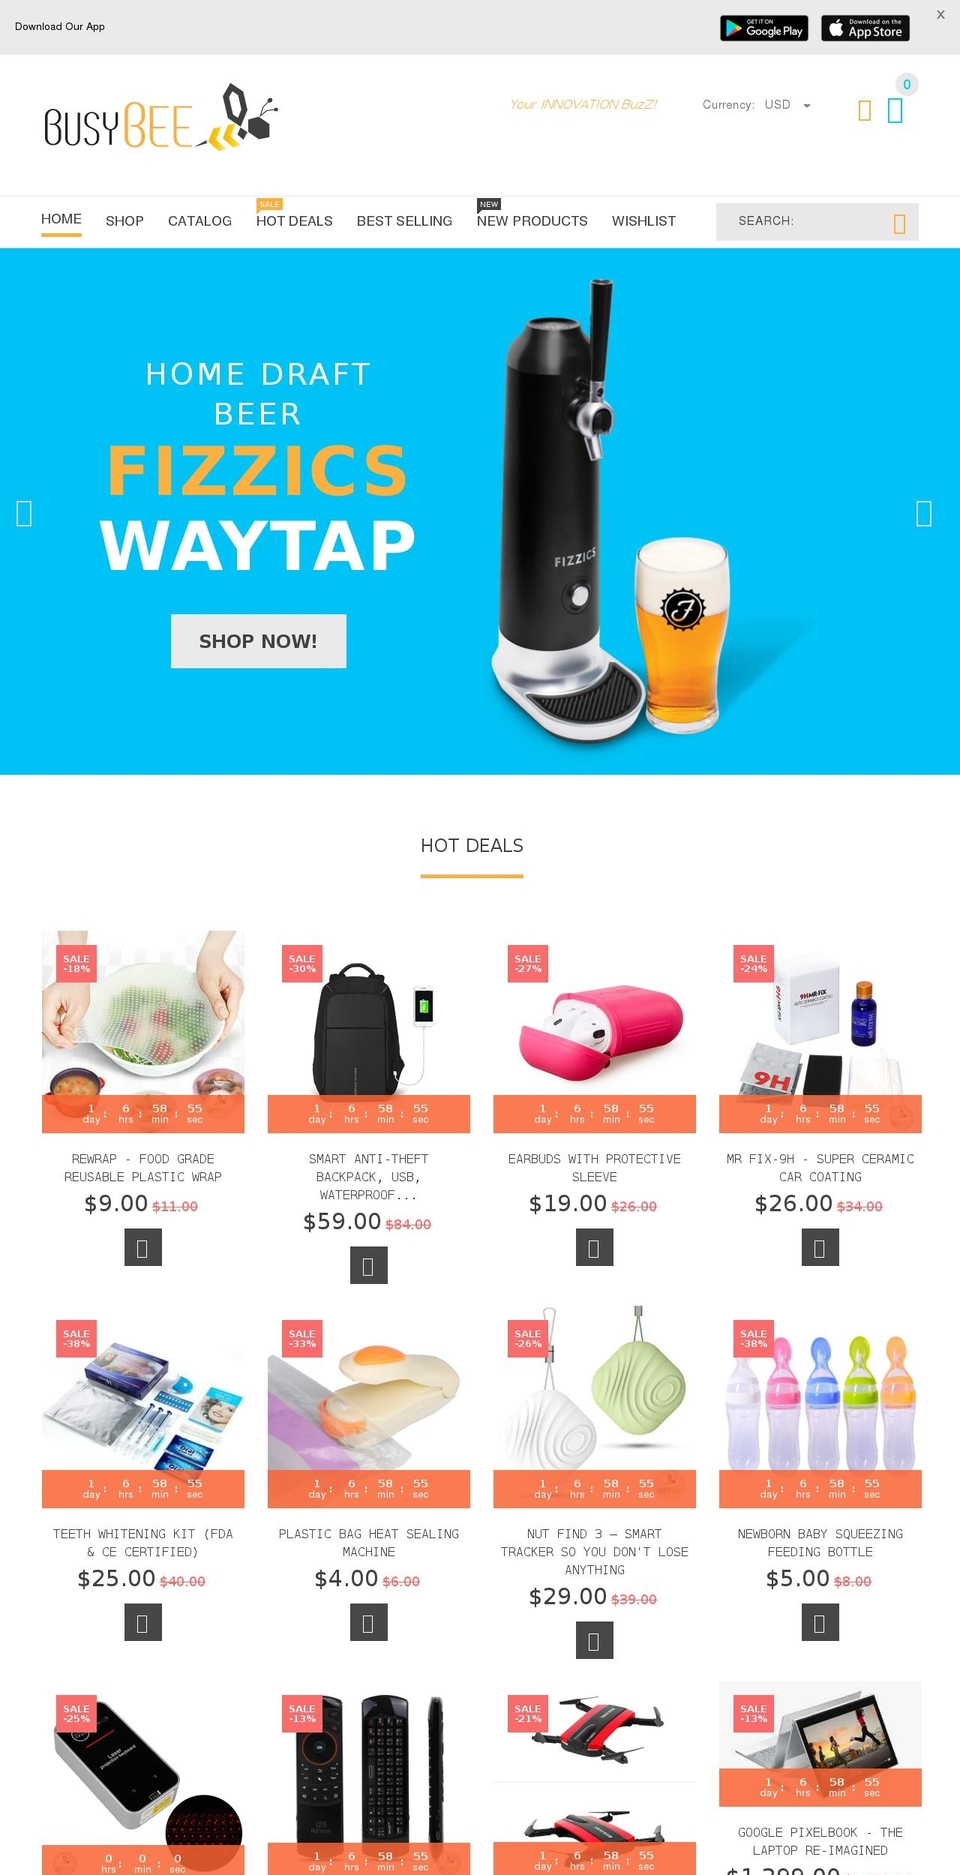 install-me-yourstore-v2-1-9 Shopify theme site example busybee.store